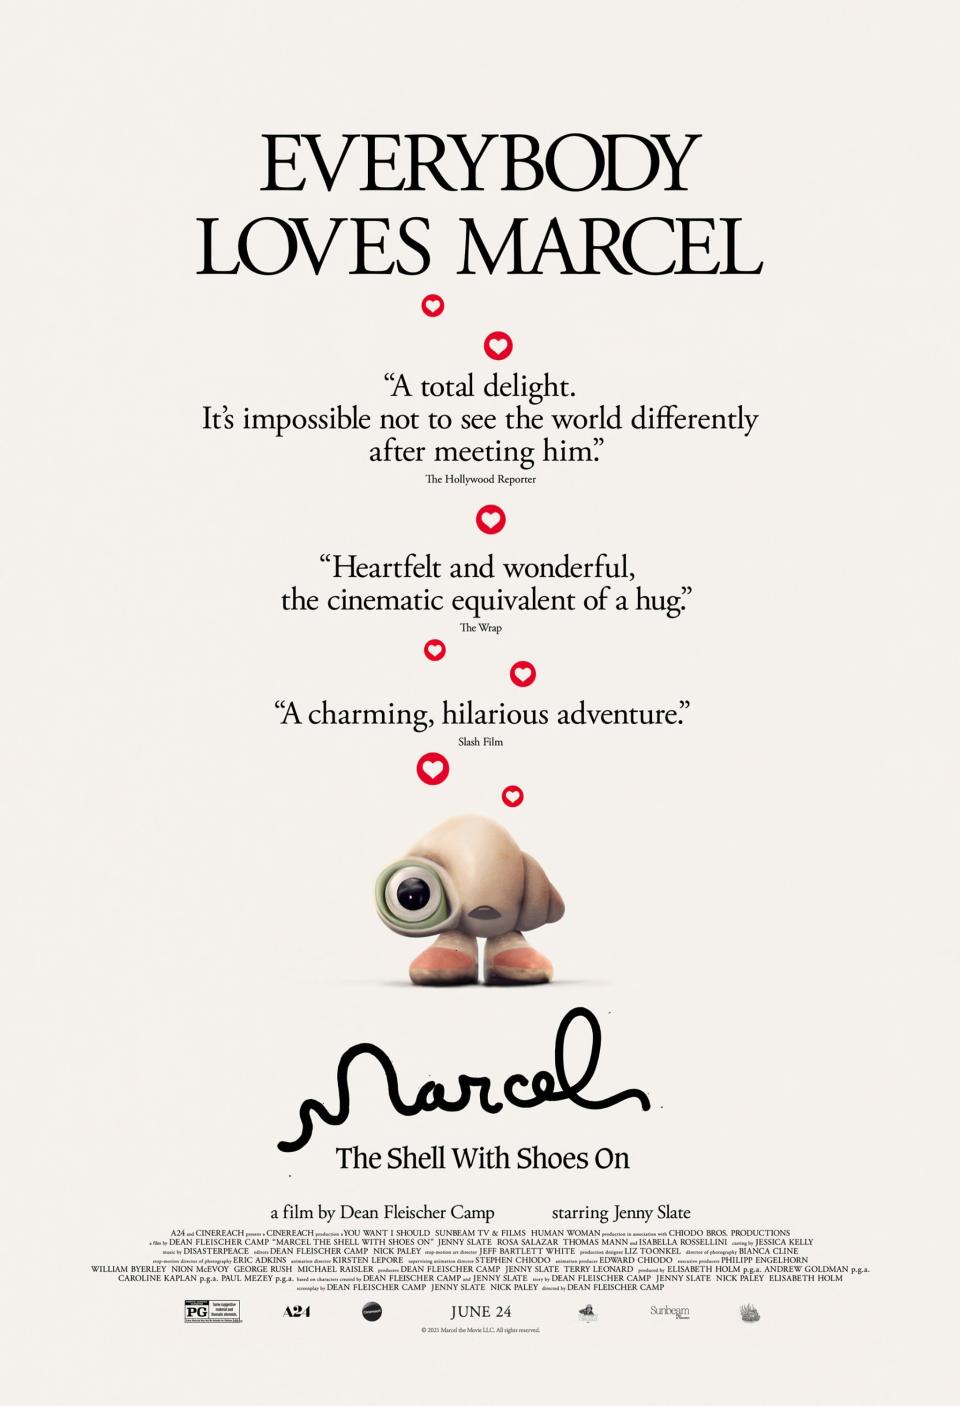 Marchel The Shell With Shoes On